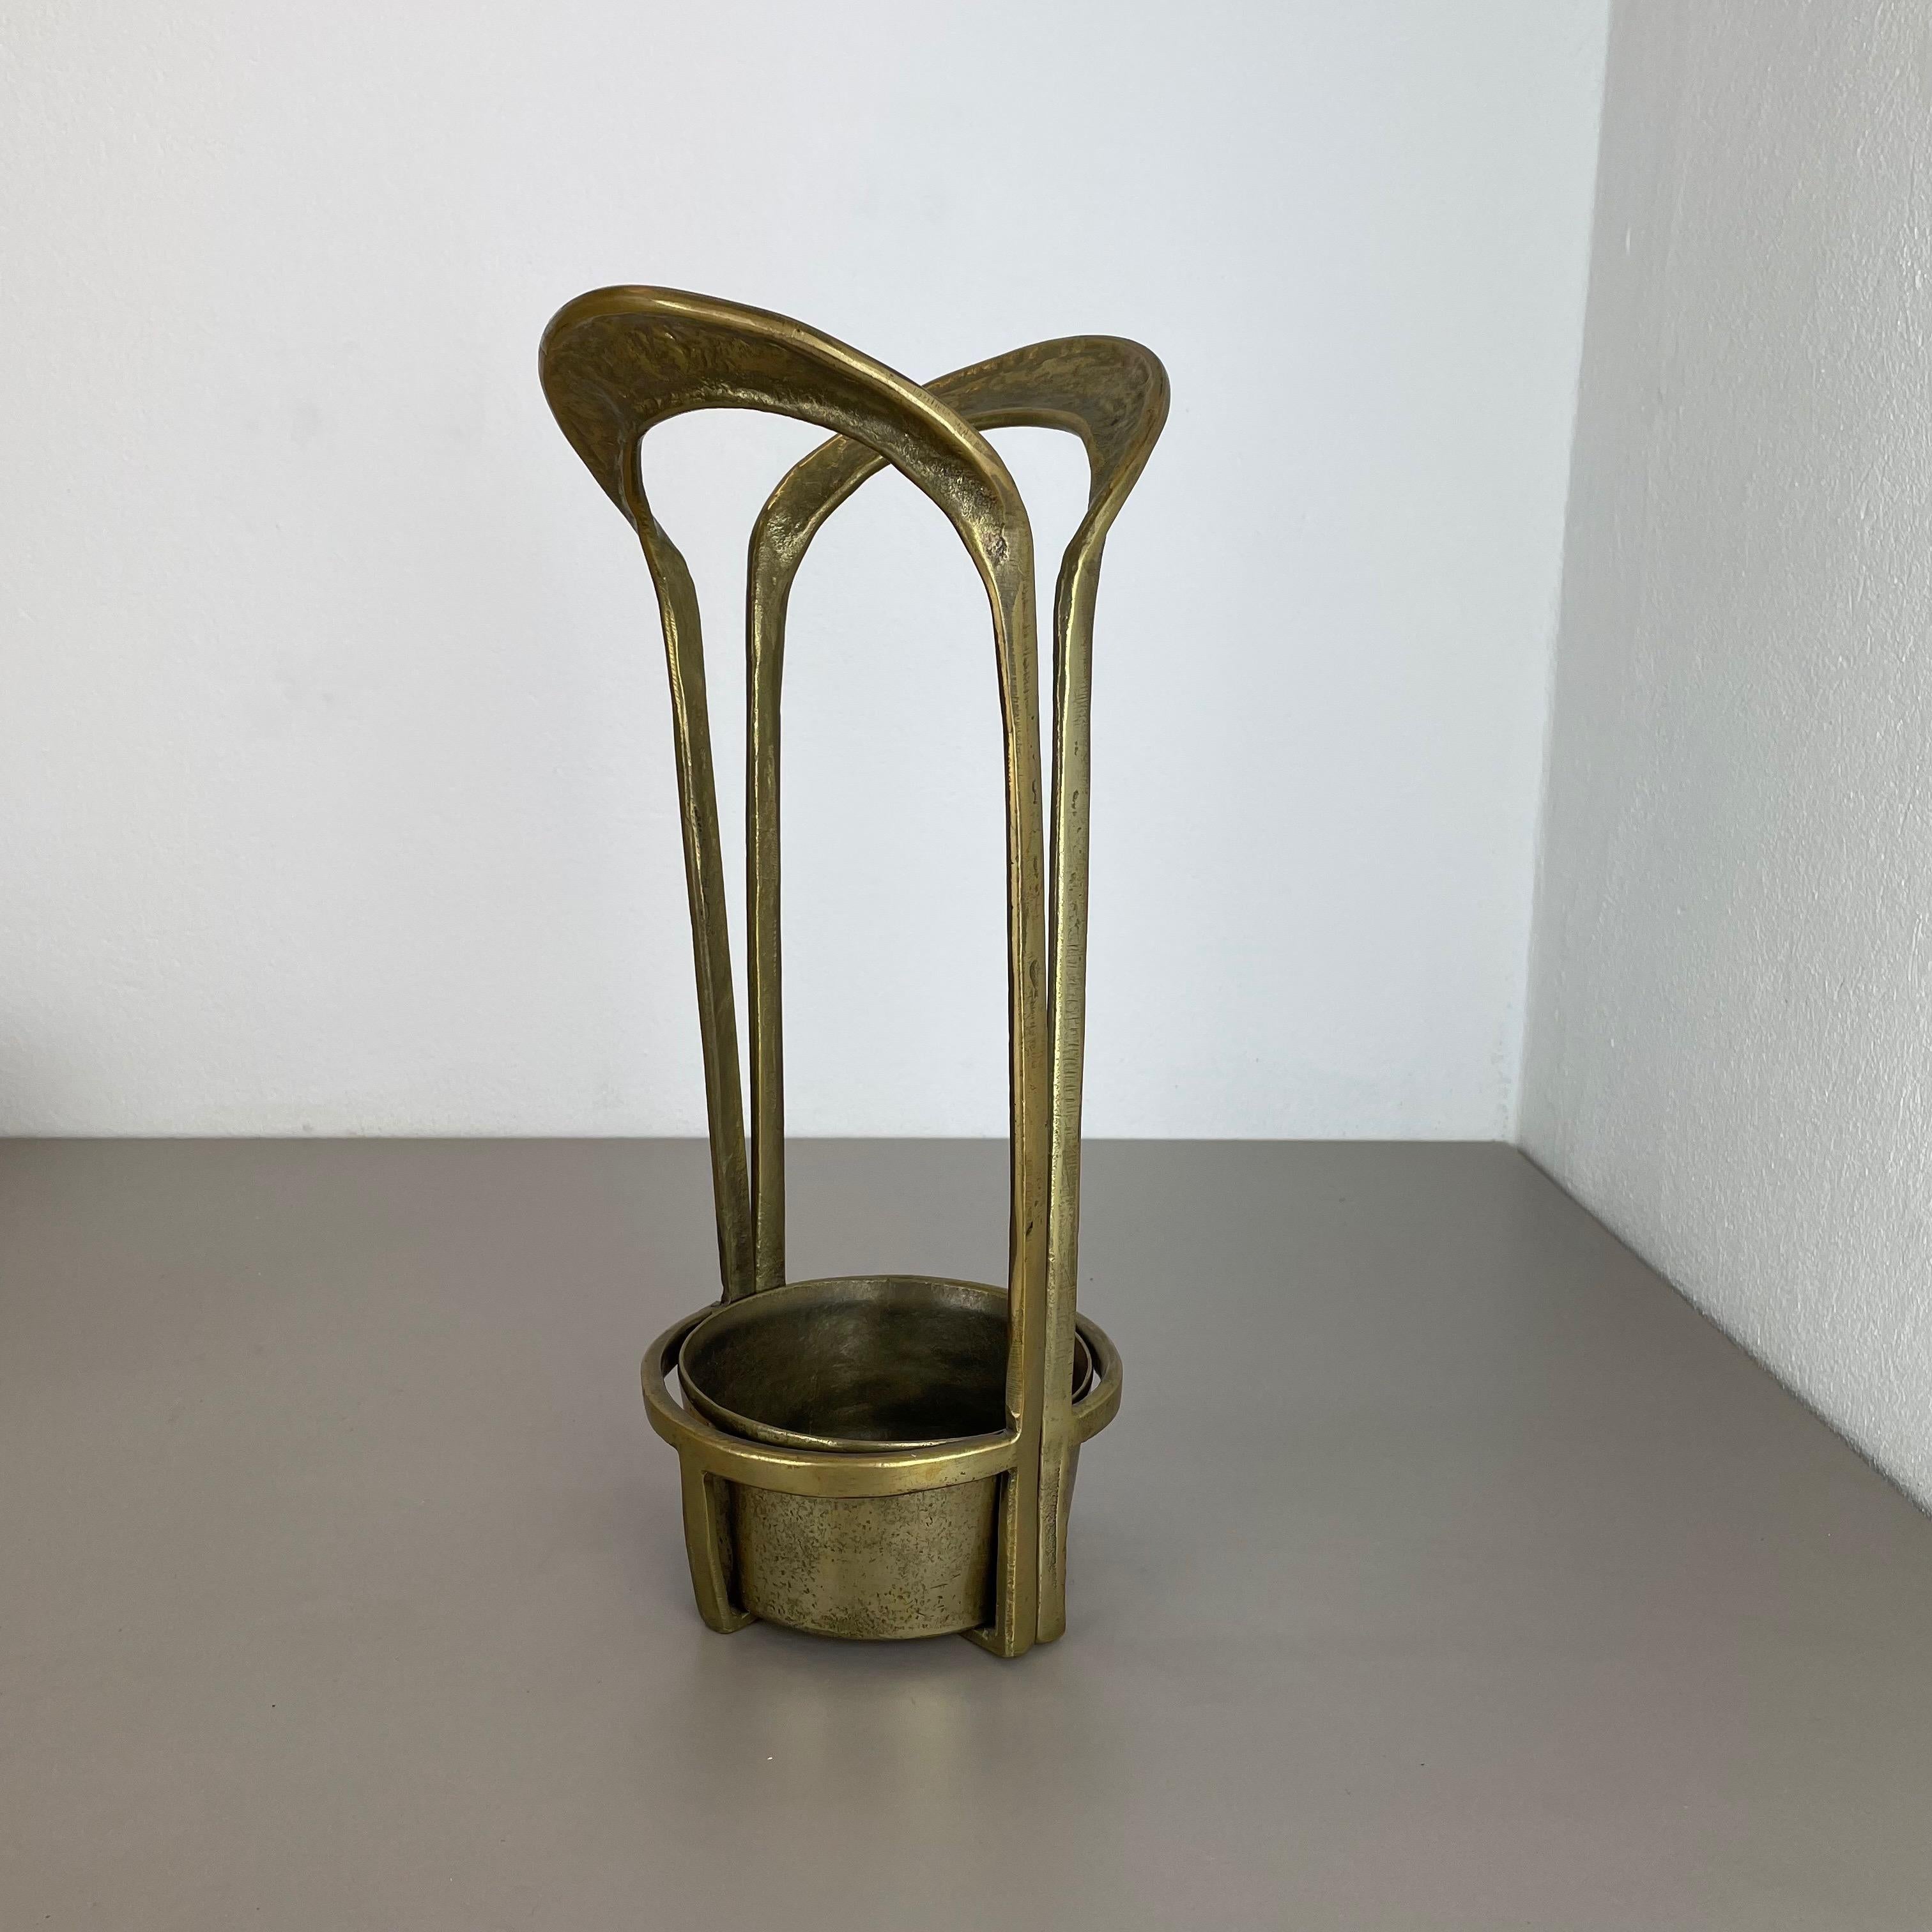 Orig. 4, 4kg Hollywood Regency Solid Brutalist Brass Umbrella Stand, Italy, 1970 In Good Condition For Sale In Kirchlengern, DE